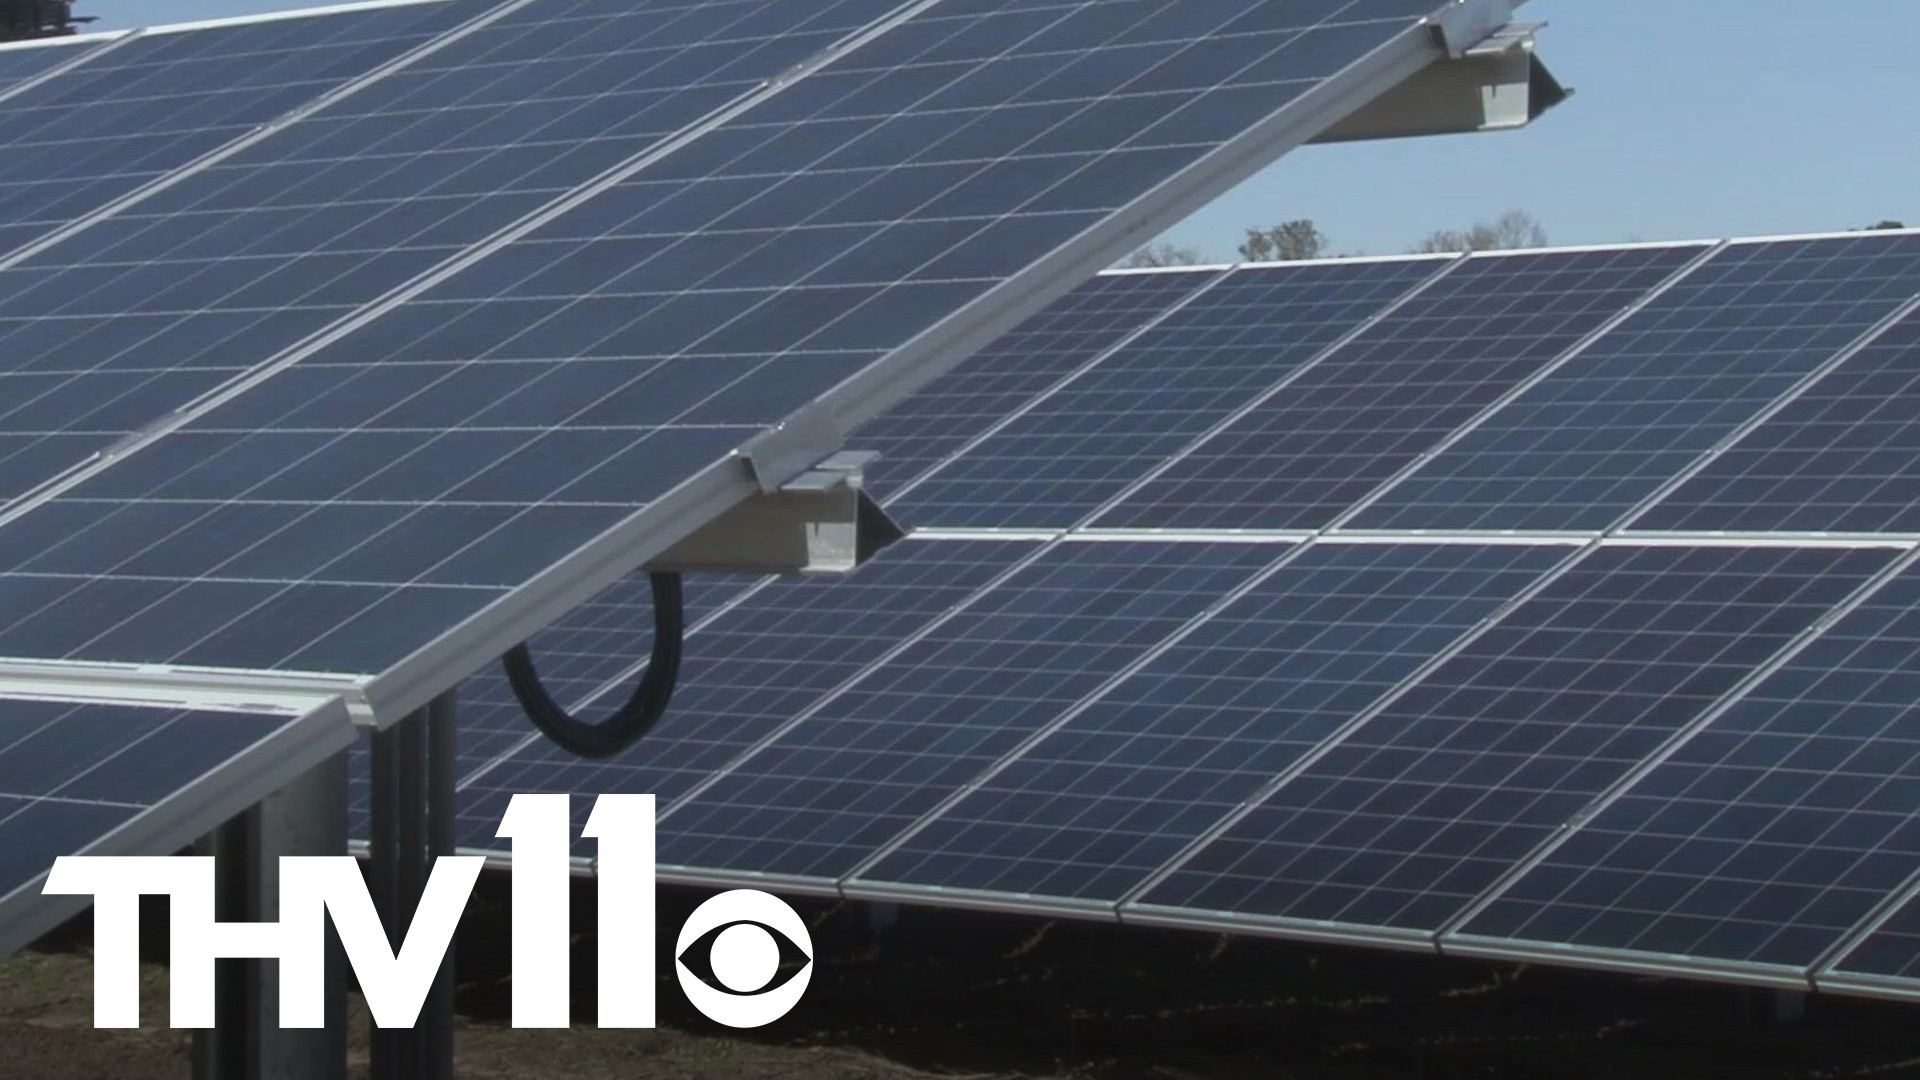 A bill that could have an impact on the future of solar energy in Arkansas has over 90 groups and individuals coming together trying to keep it from becoming law.